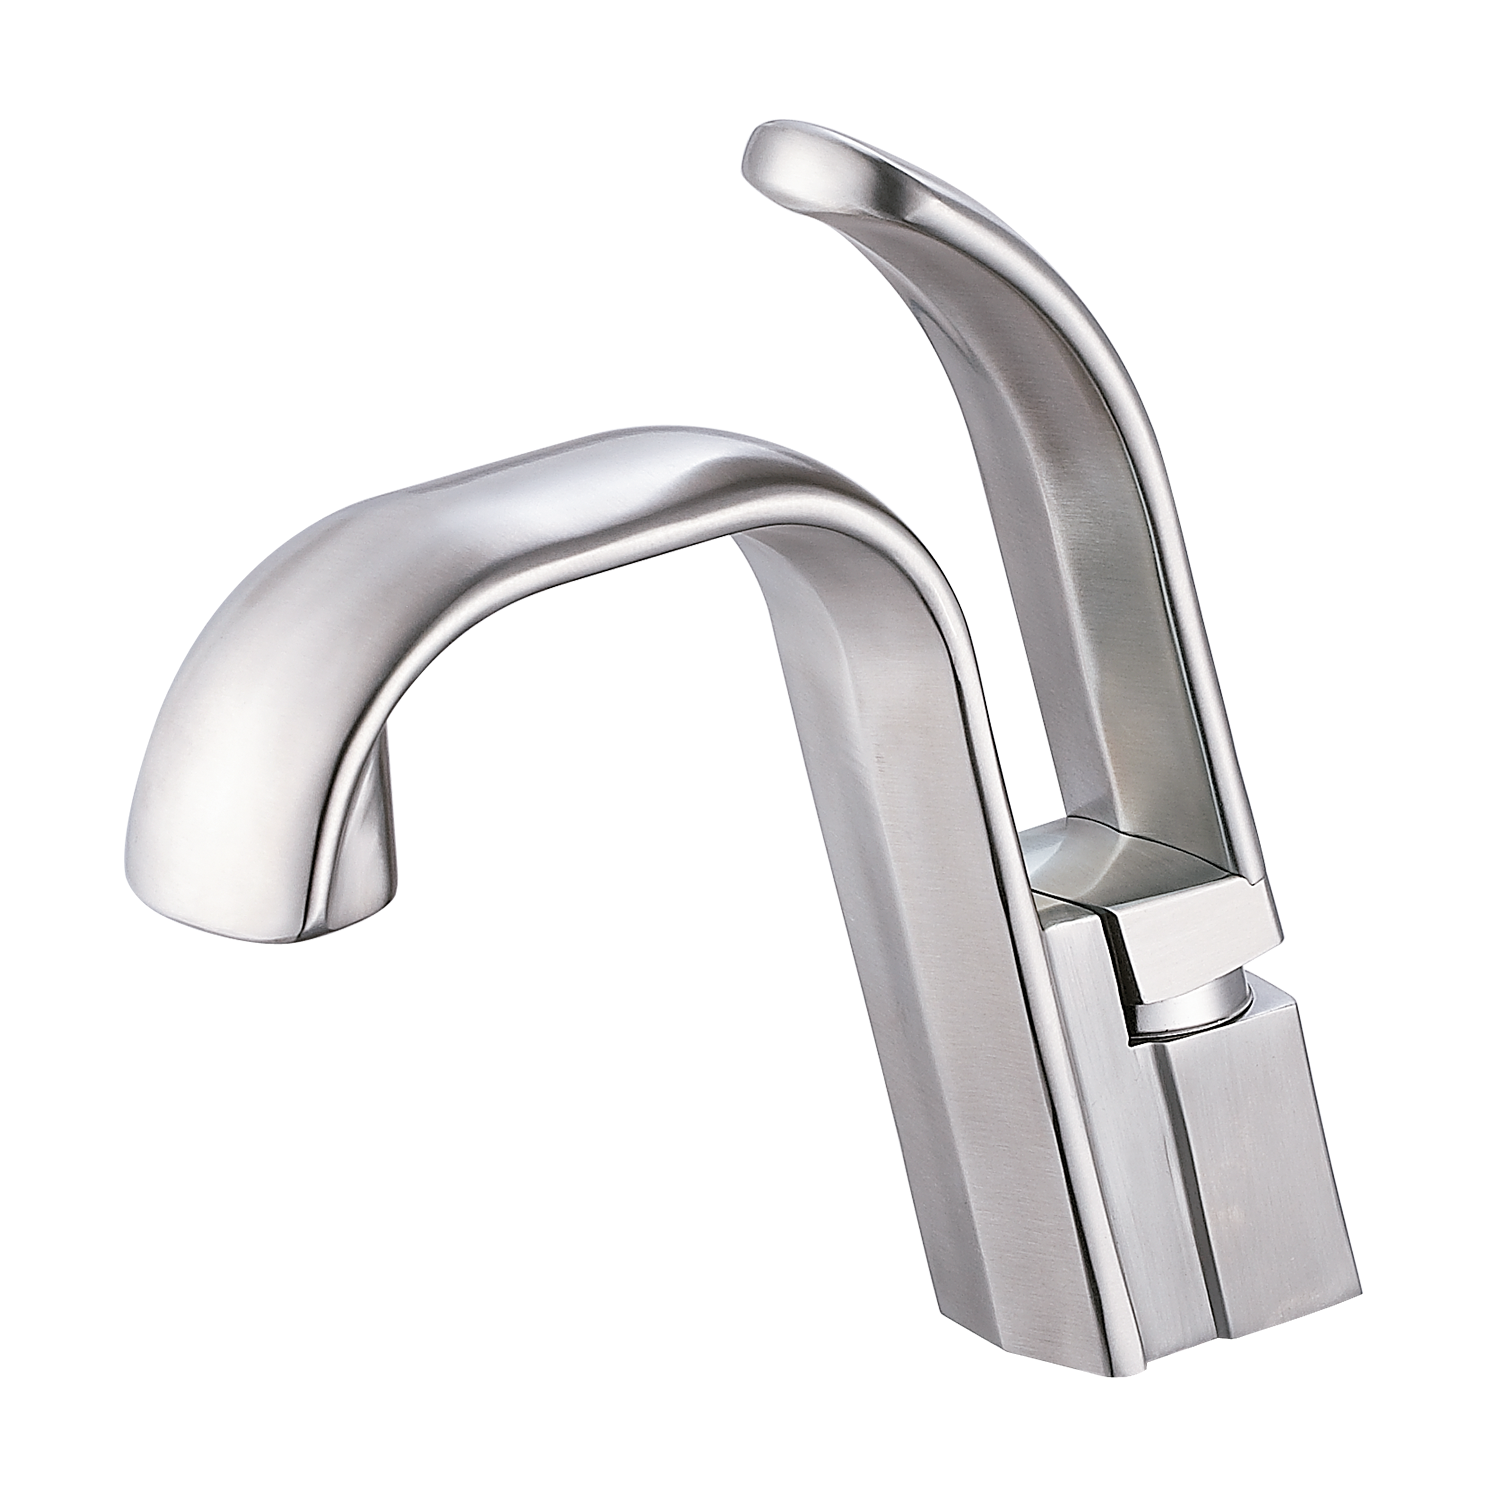 DAX Single Handle Vessel Sink Bathroom Faucet, Stainless Steel Body, Brushed Finish, 8-7/16 x 7-11/16 Inches (DAX-C011-02)